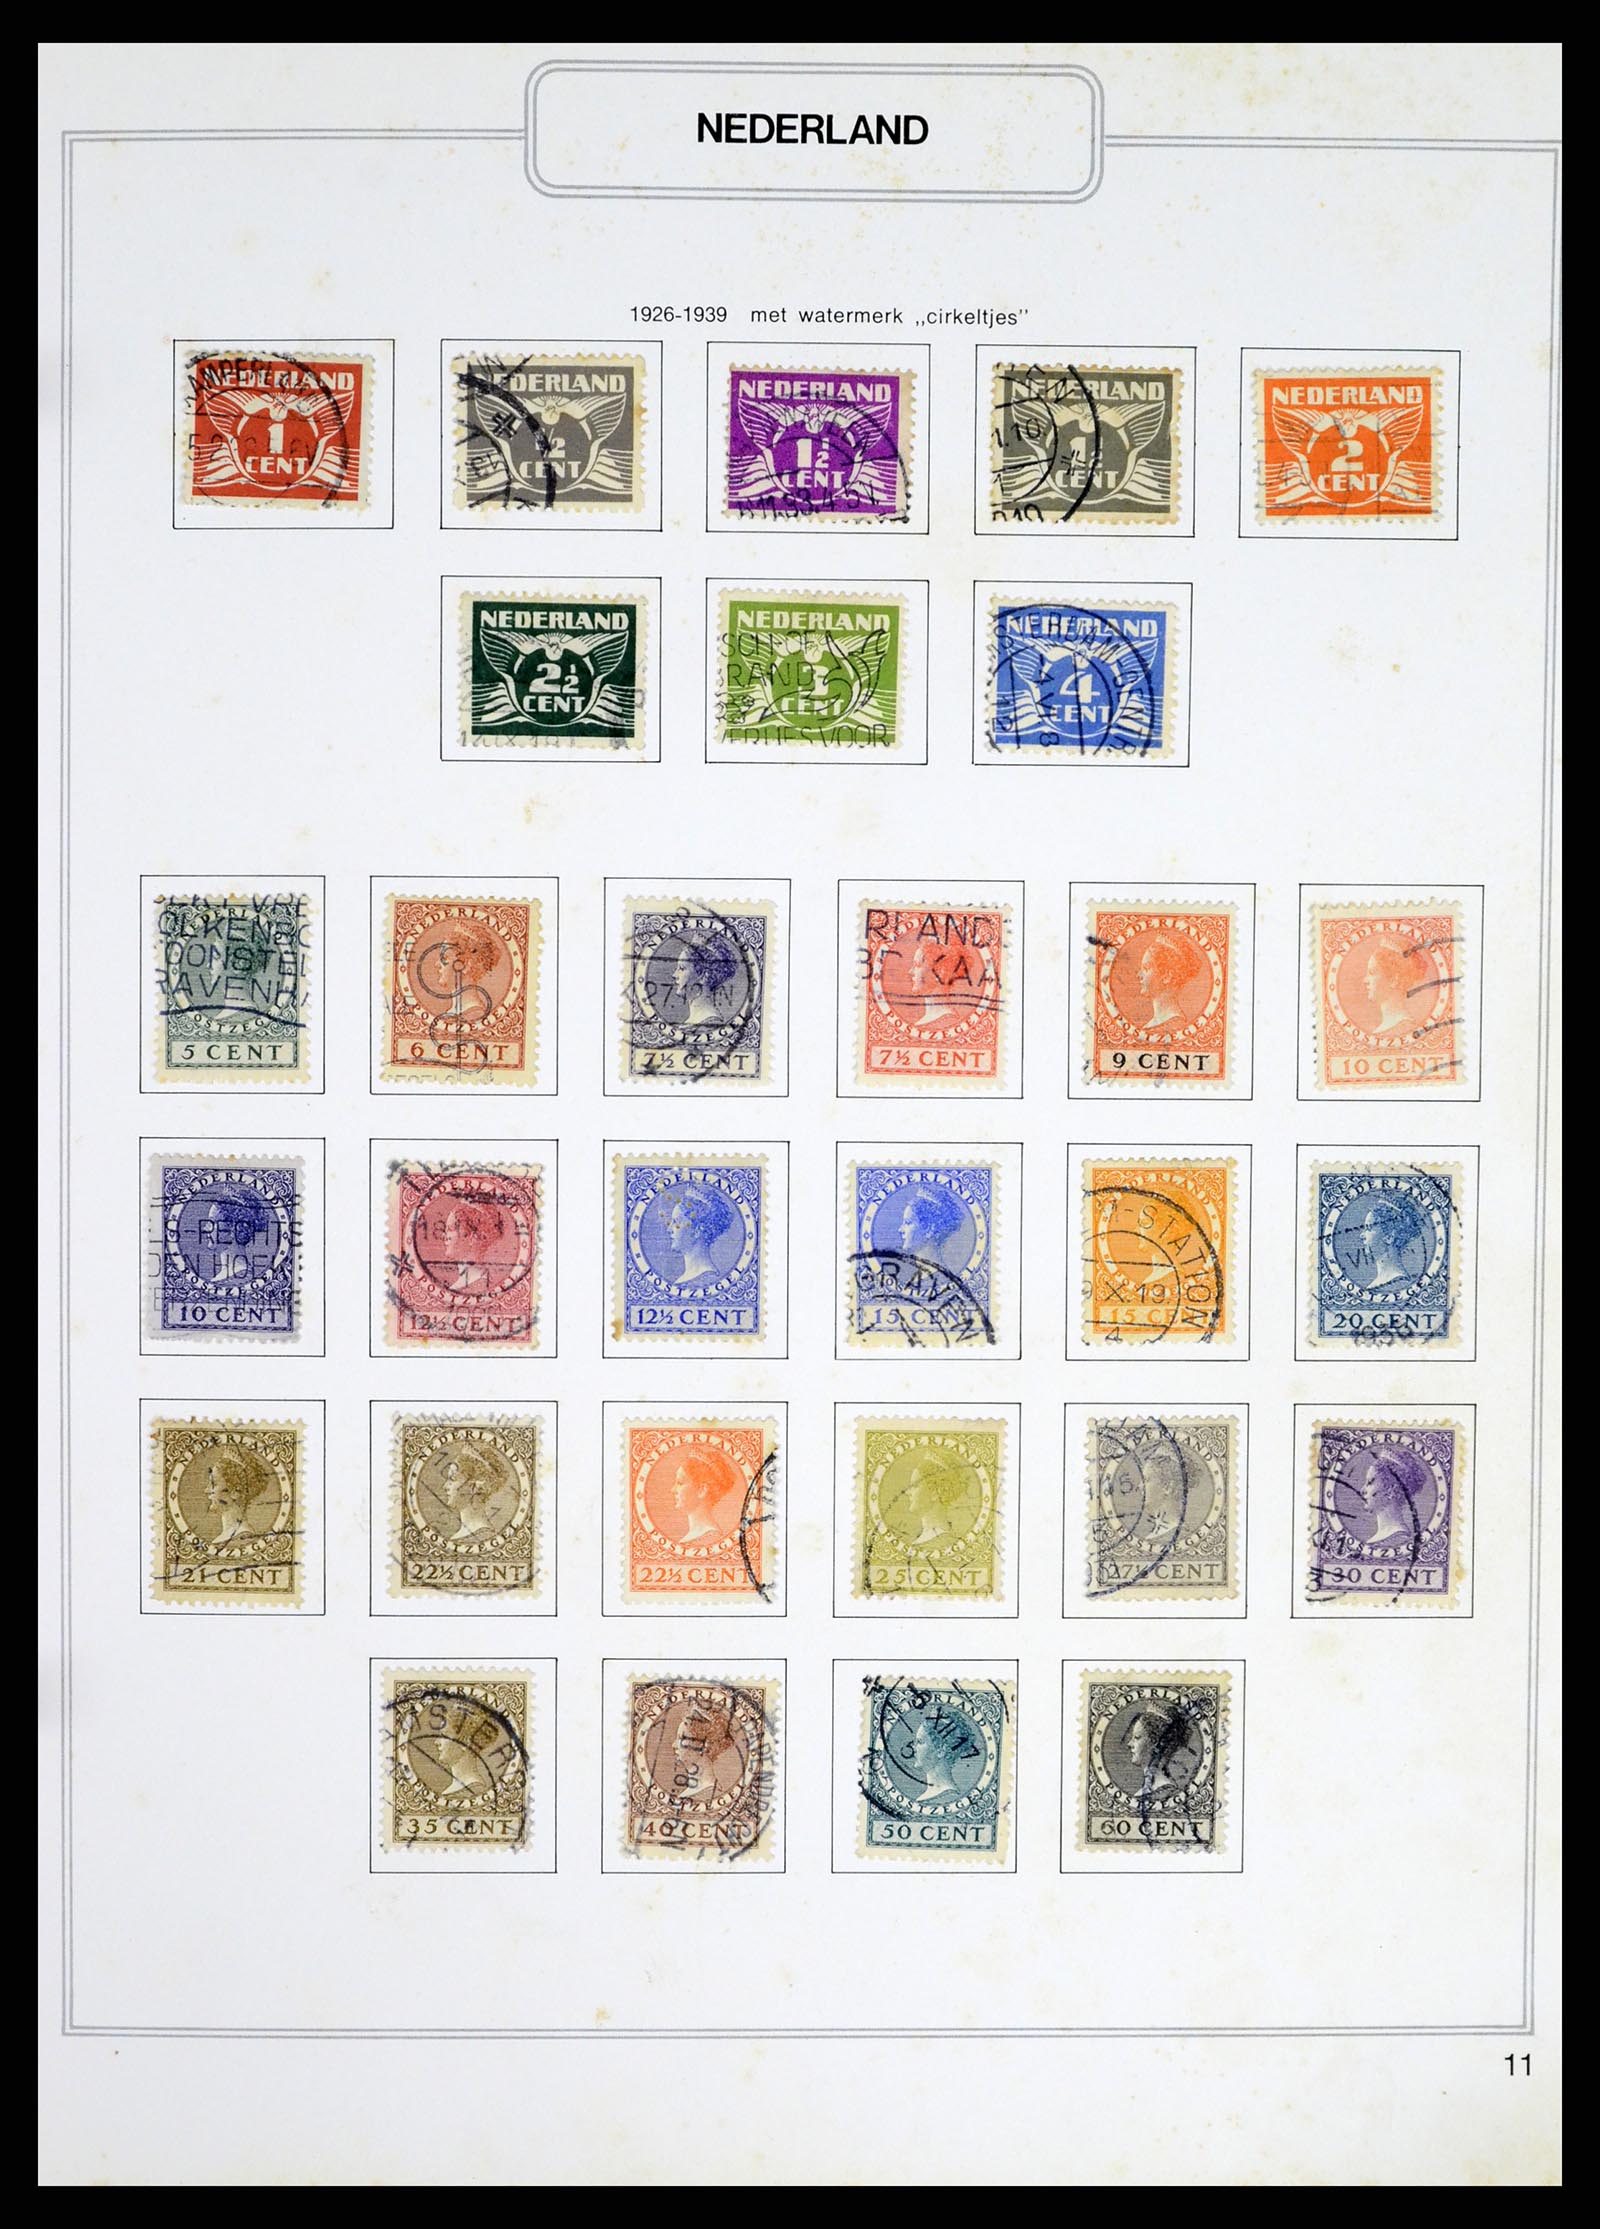 37348 011 - Stamp collection 37348 Netherlands 1852-1995.